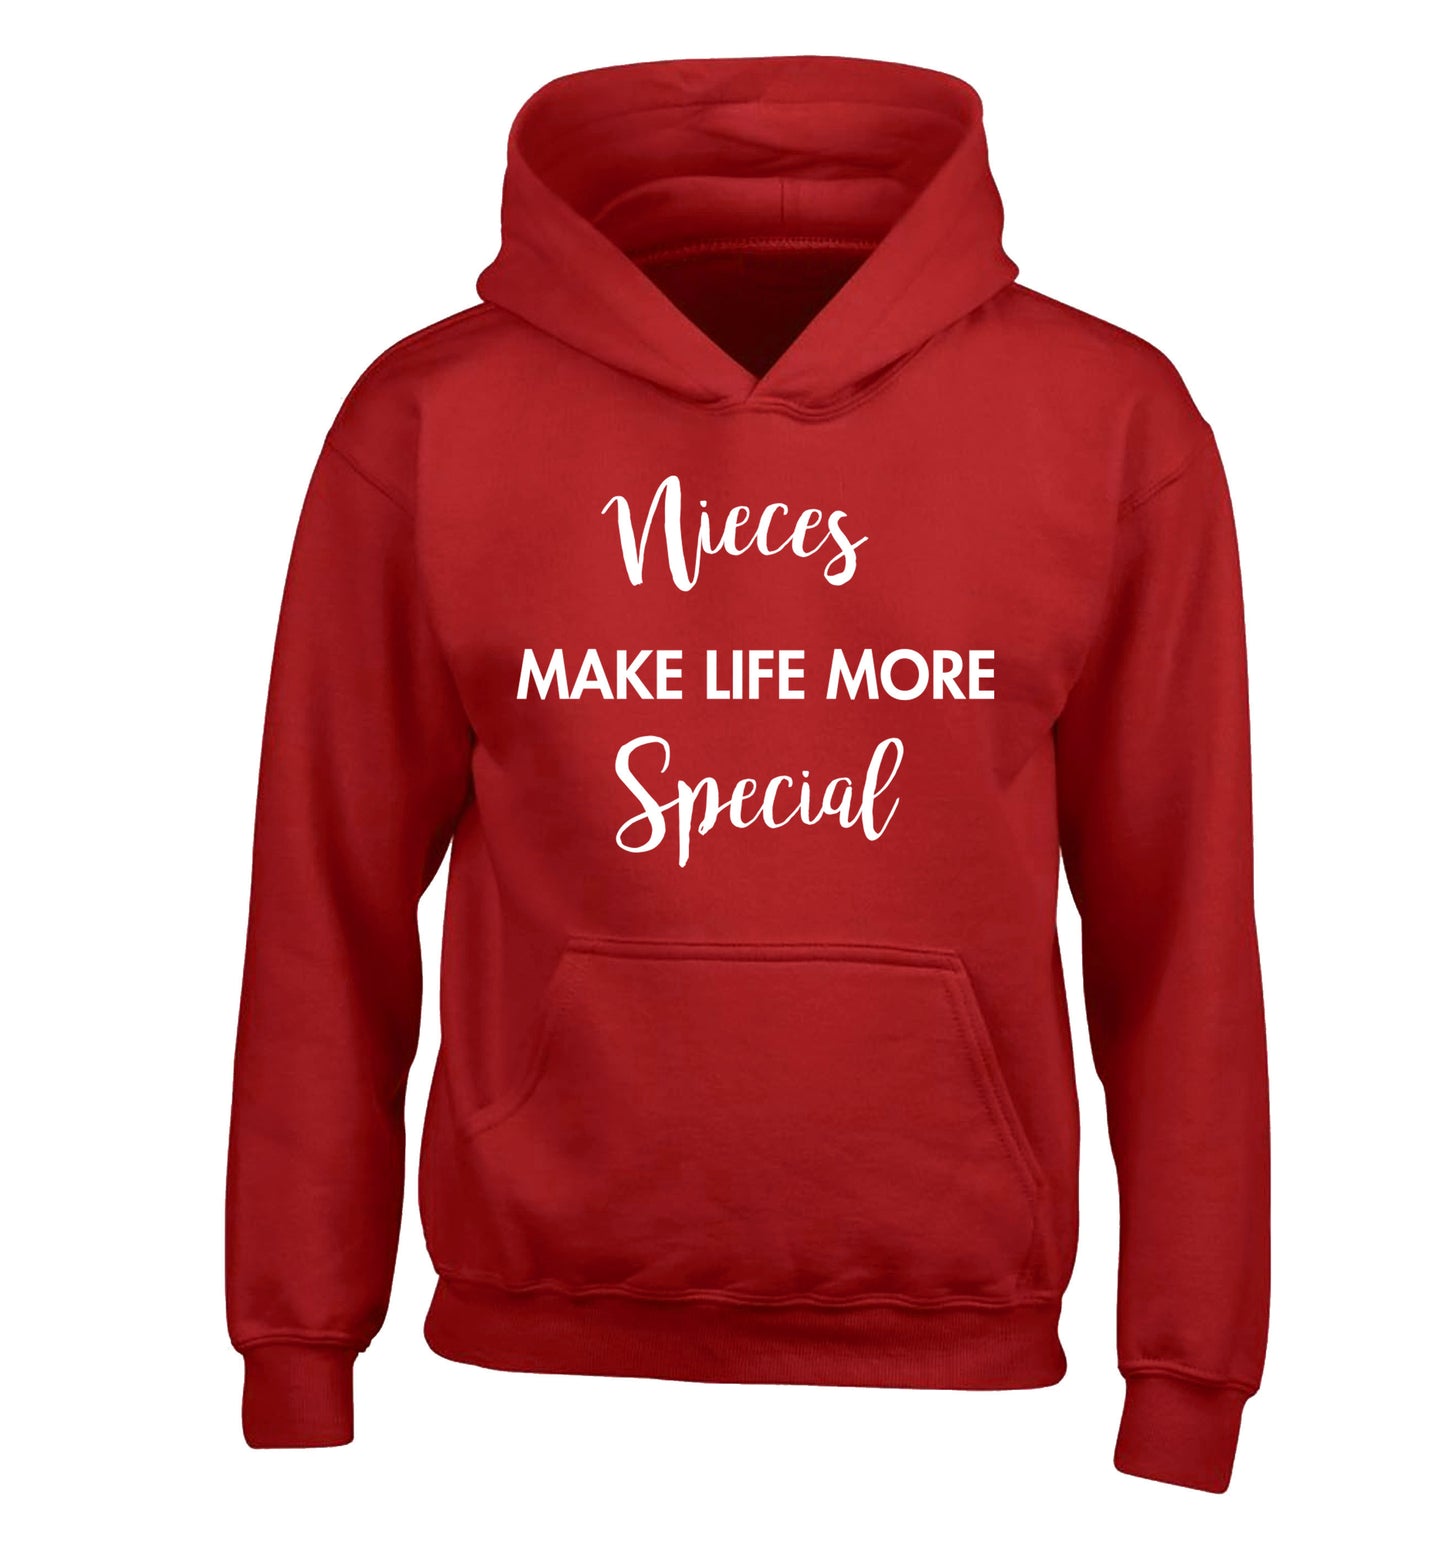 Nieces make life more special children's red hoodie 12-14 Years